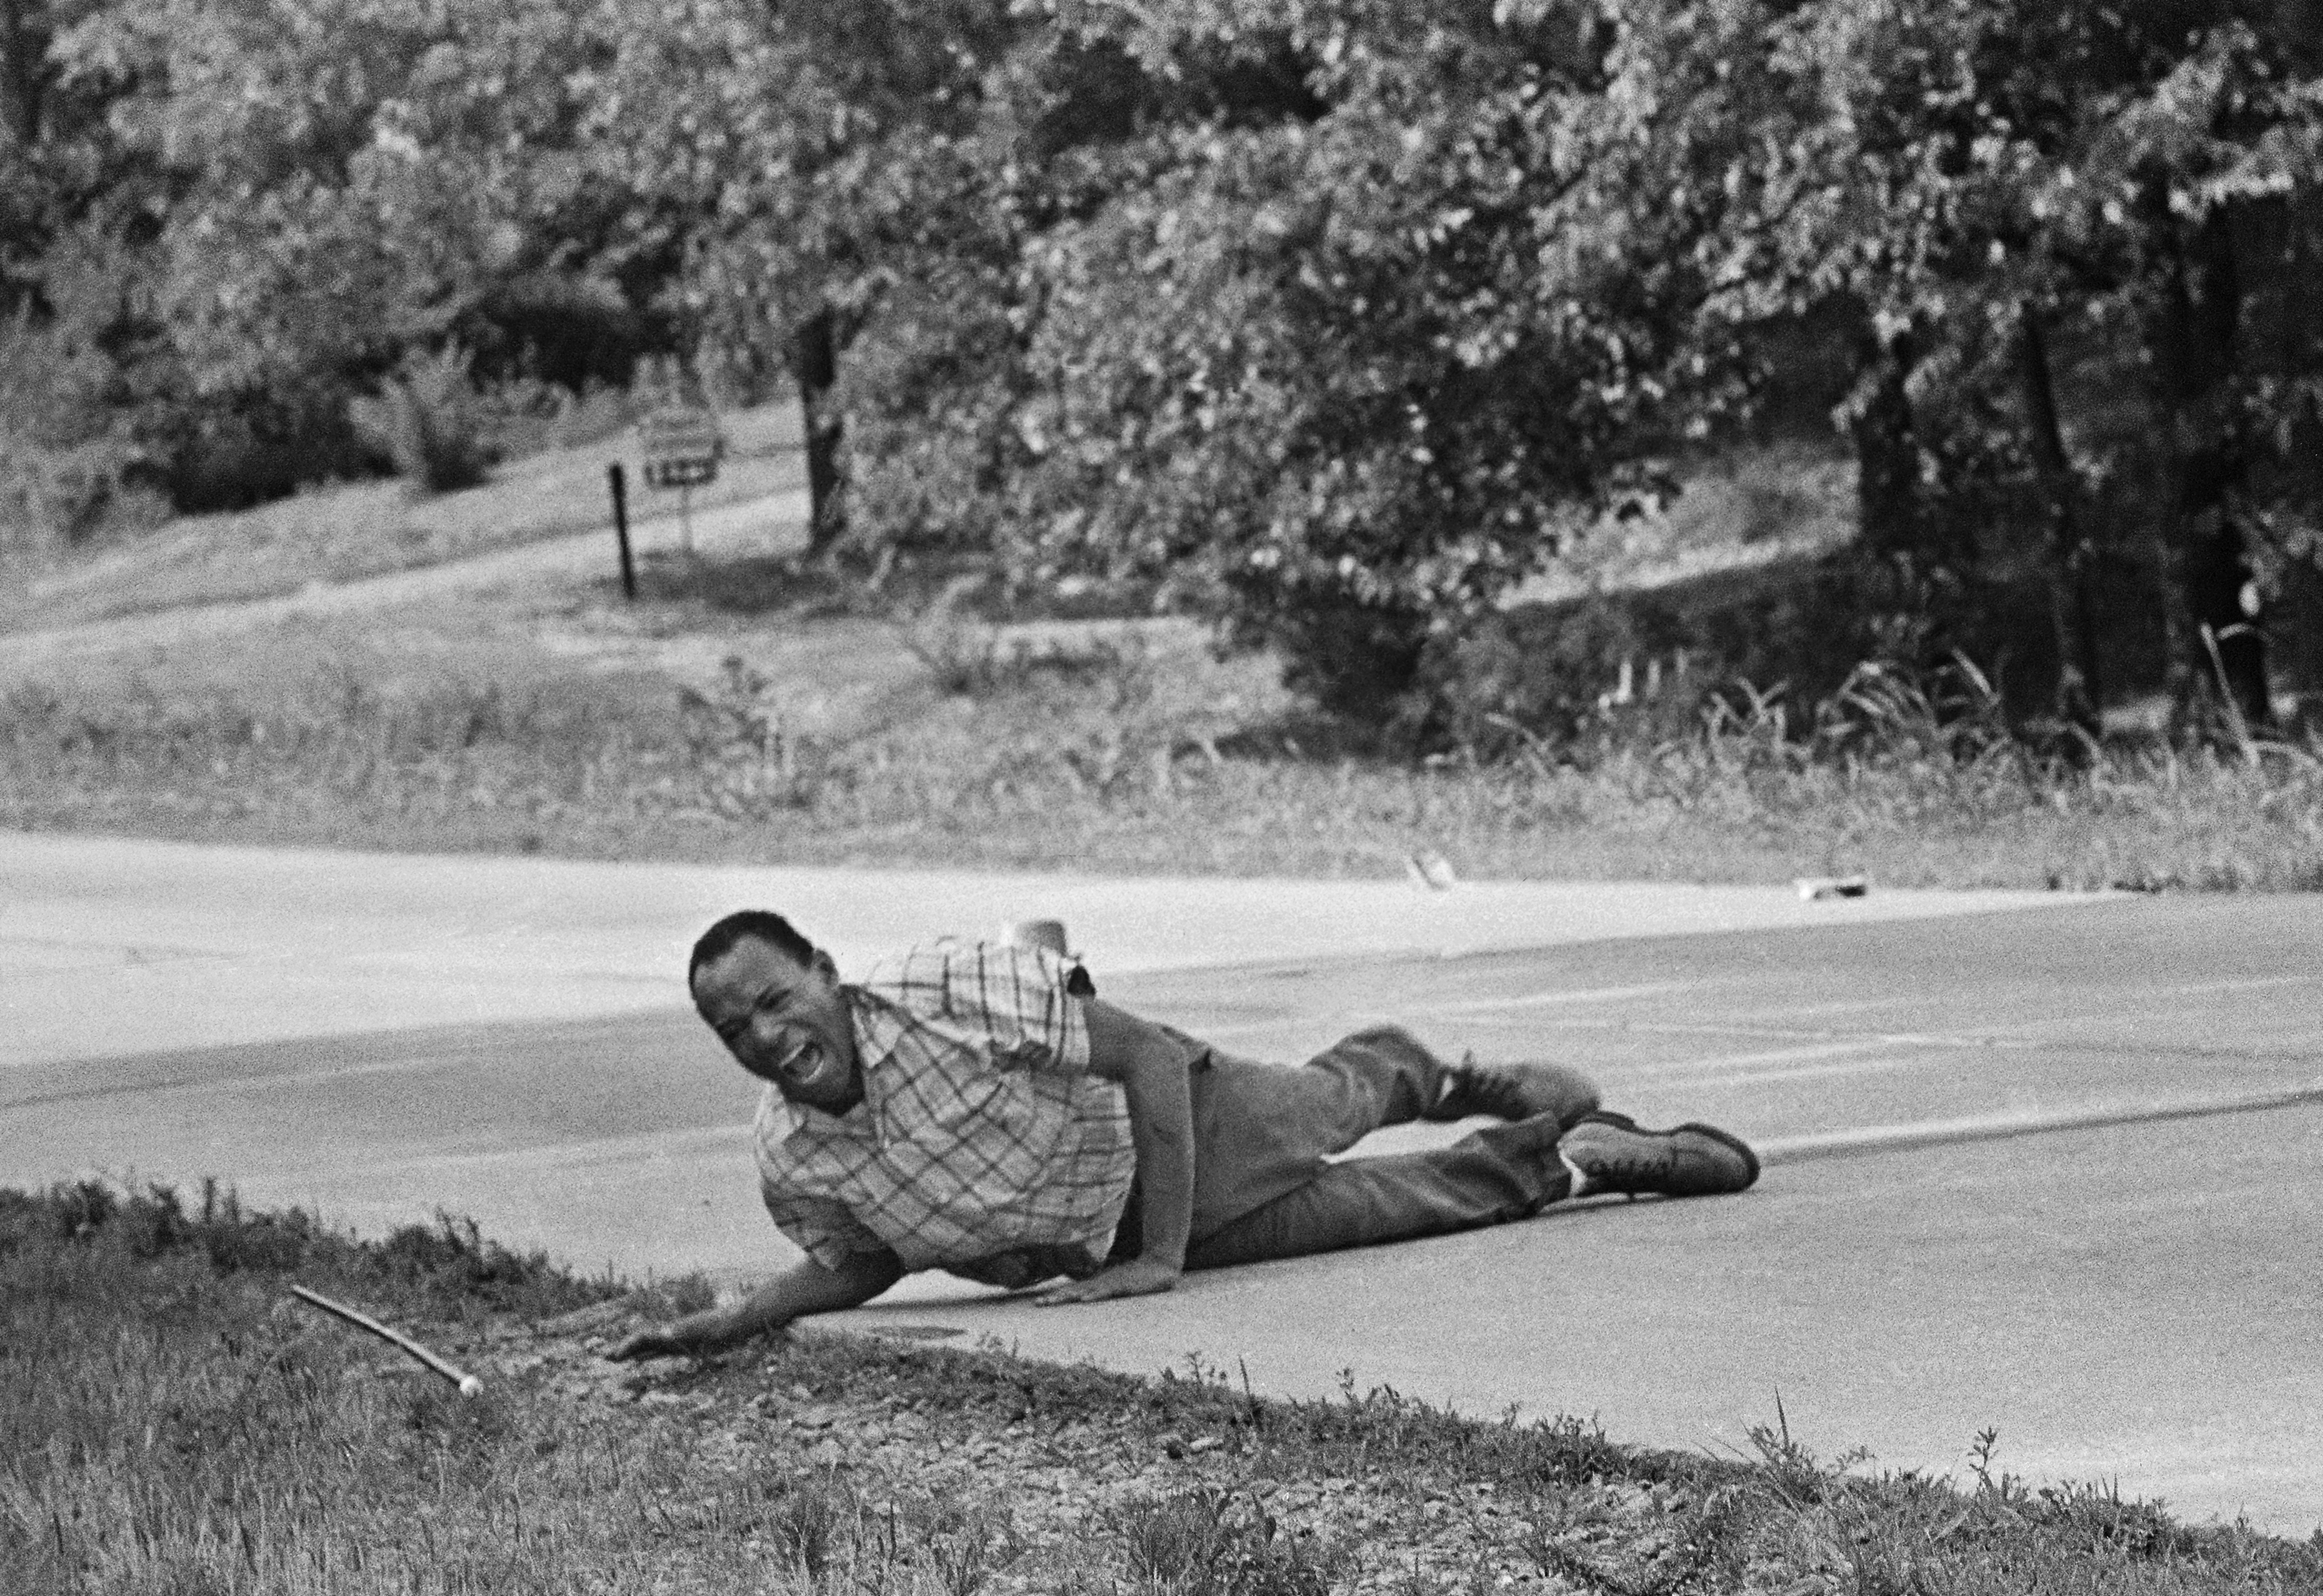 Civil rights activist James Meredith grimaces in pain as he pulls himself across Highway 51 after being shot in Hernando, Miss., June 6, 1966. Meredith was leading the March Against Fear to encourage African Americans to exercise their voting rights when he was shot. He completed the march from Memphis, Tenn., to Jackson, Miss., after treatment of his wounds. (AP Photo/Jack Thornell)